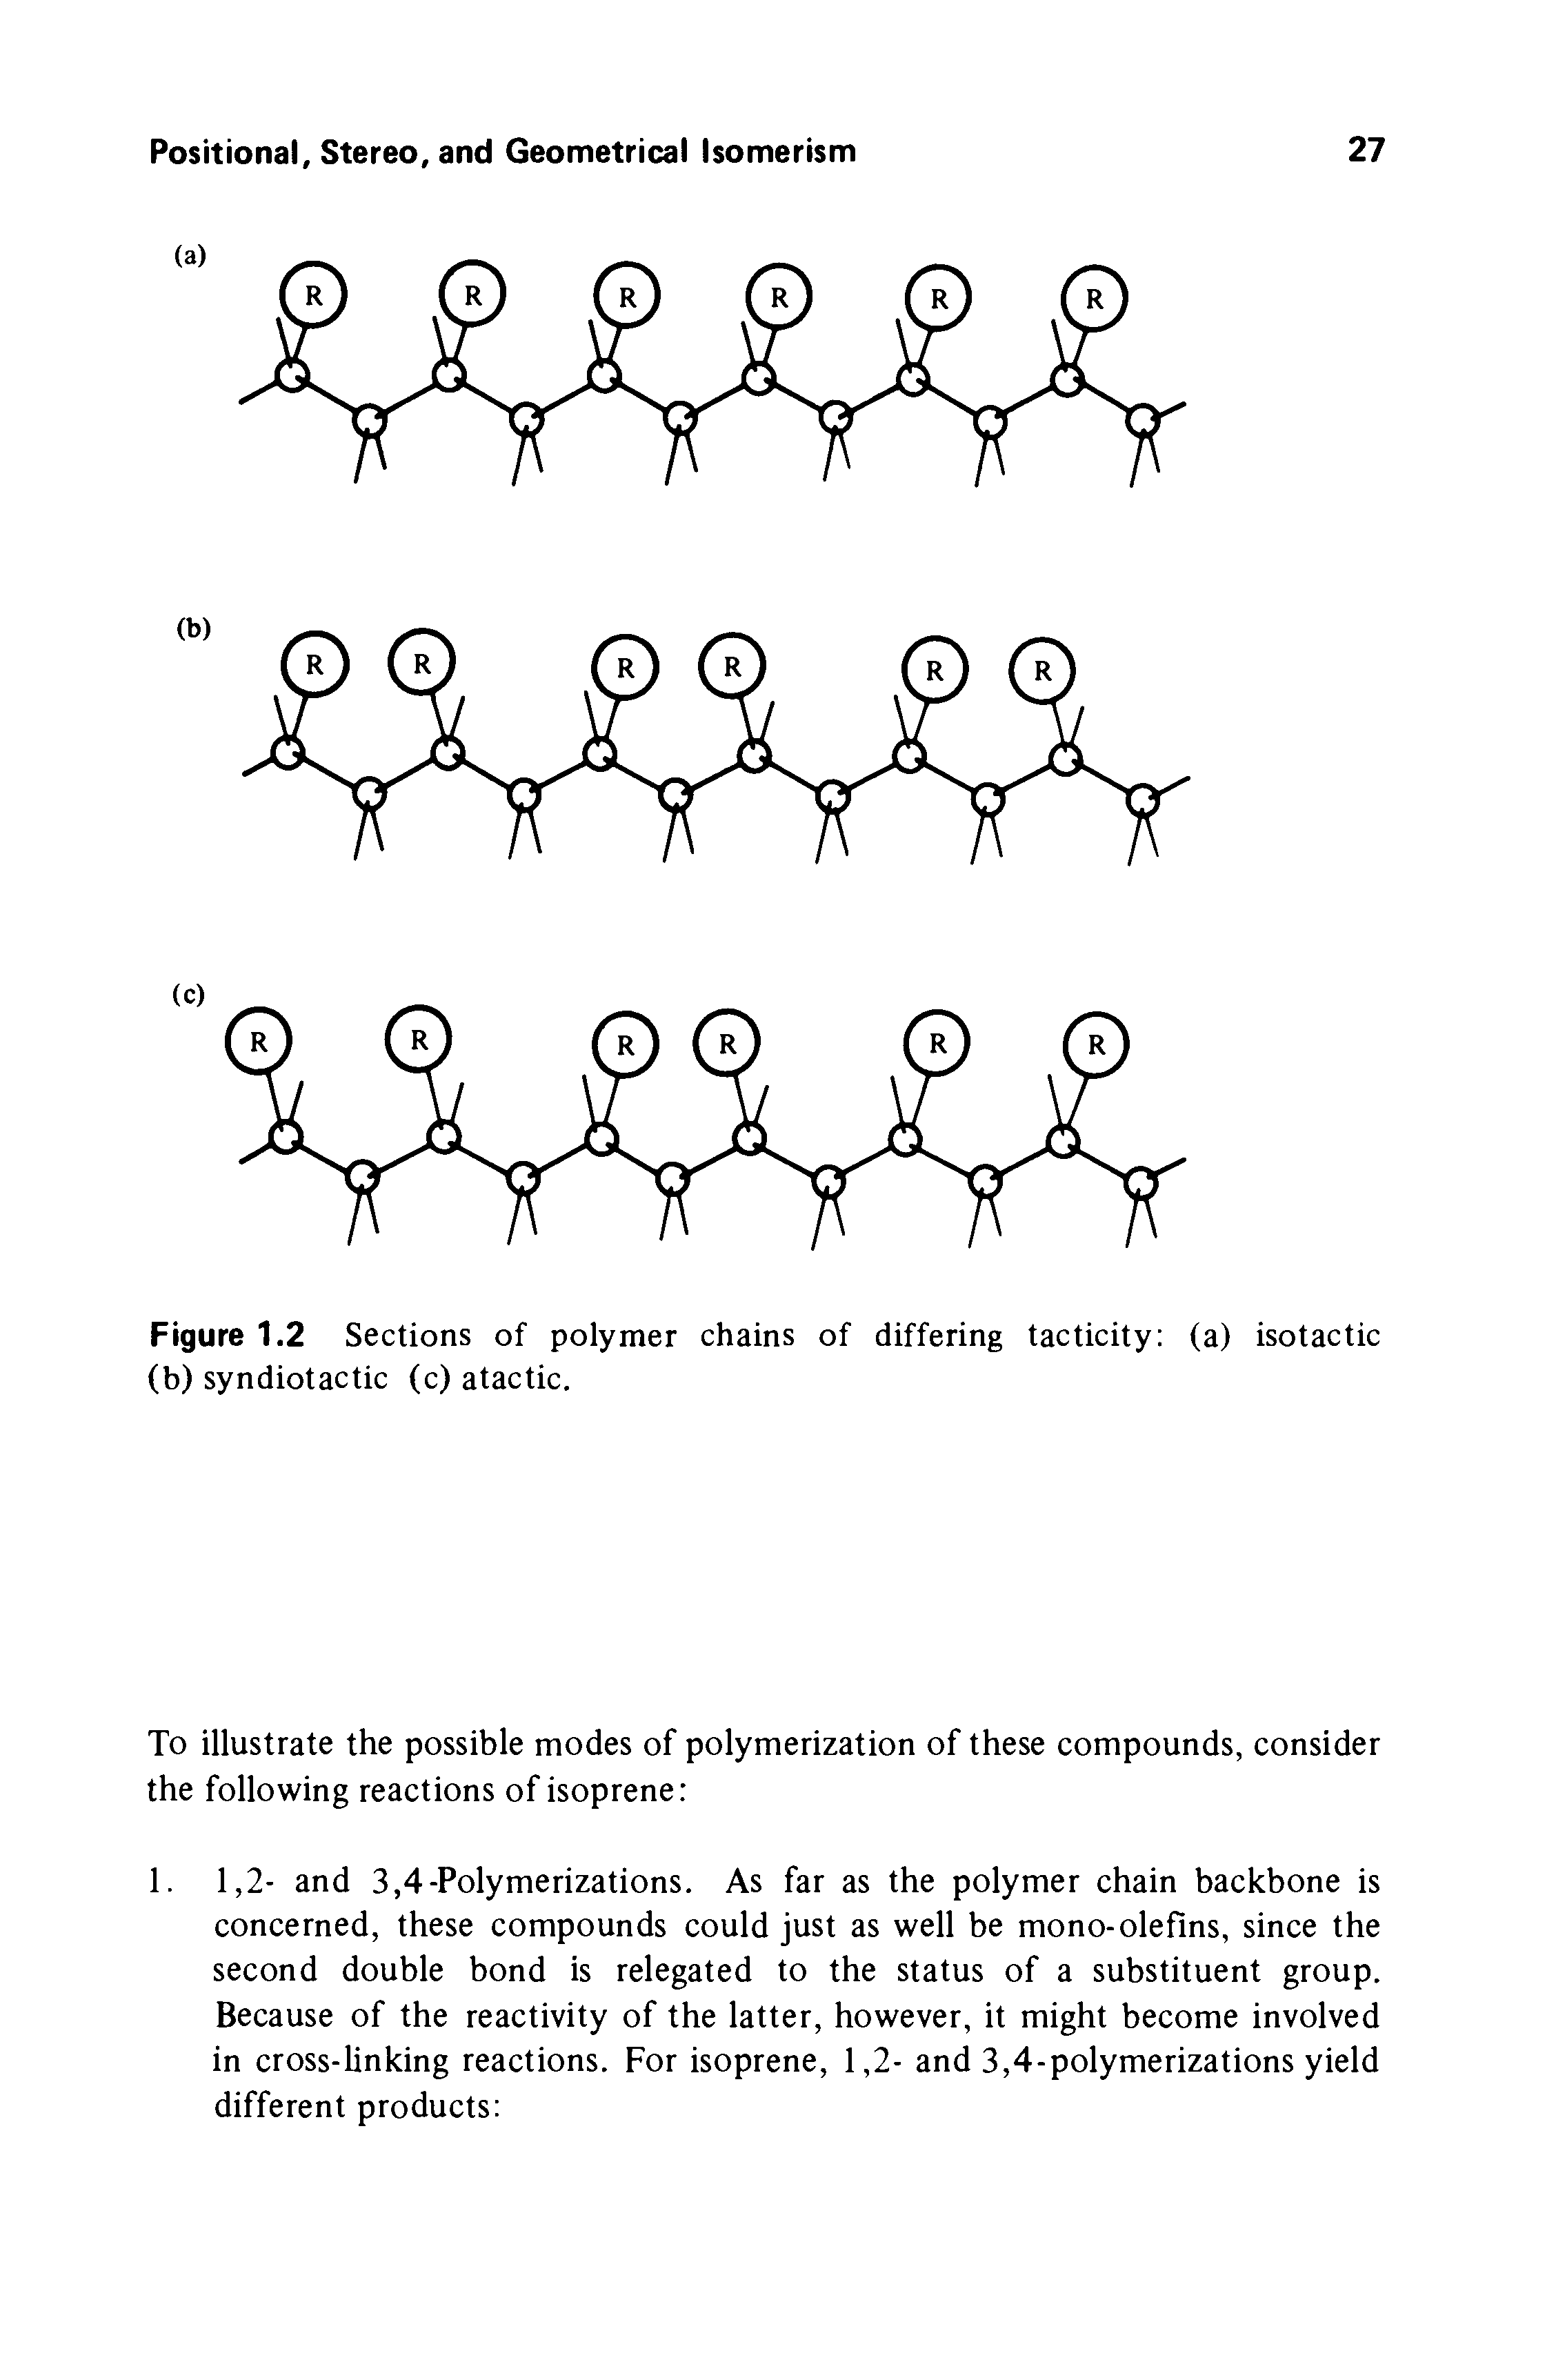 Figure 1.2 Sections of polymer chains of differing tacticity (a) isotactic (b) syndiotactic (c) atactic.